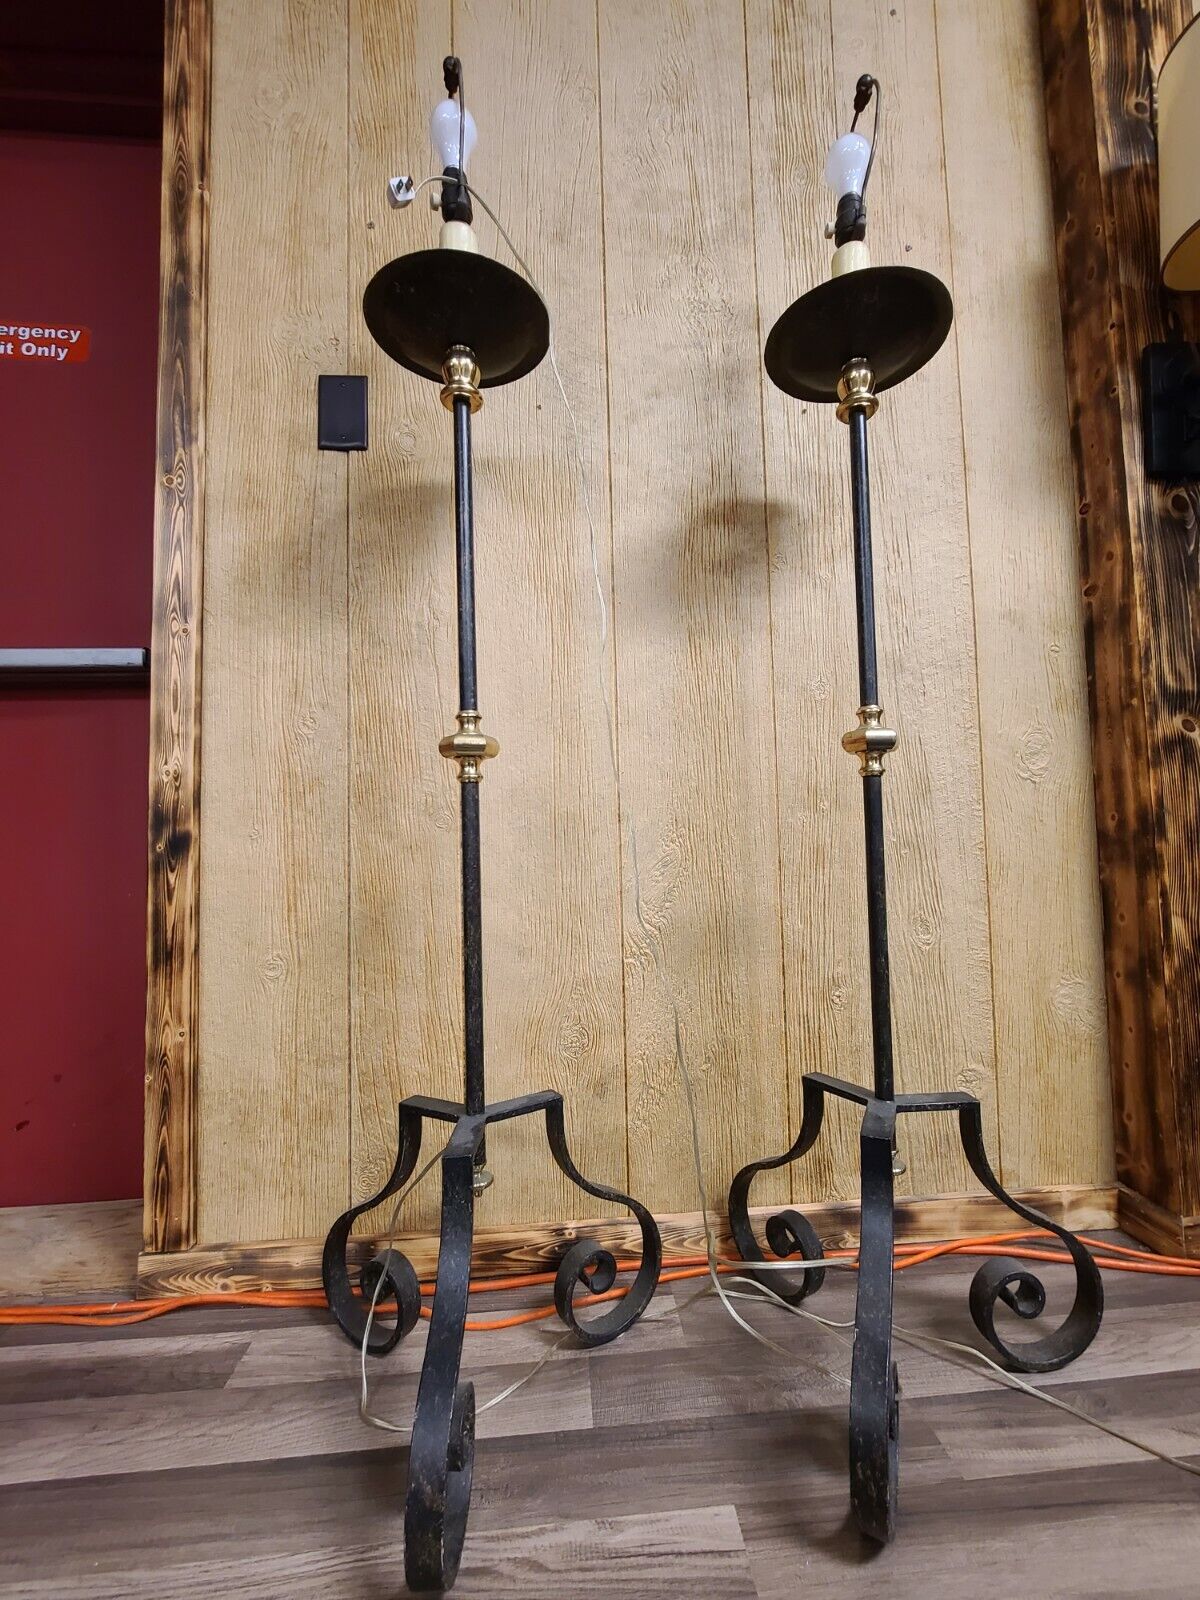 Wrought Iron Metal Pair of Mid Century Floor Lamps 3 Legs Dimmer Switches